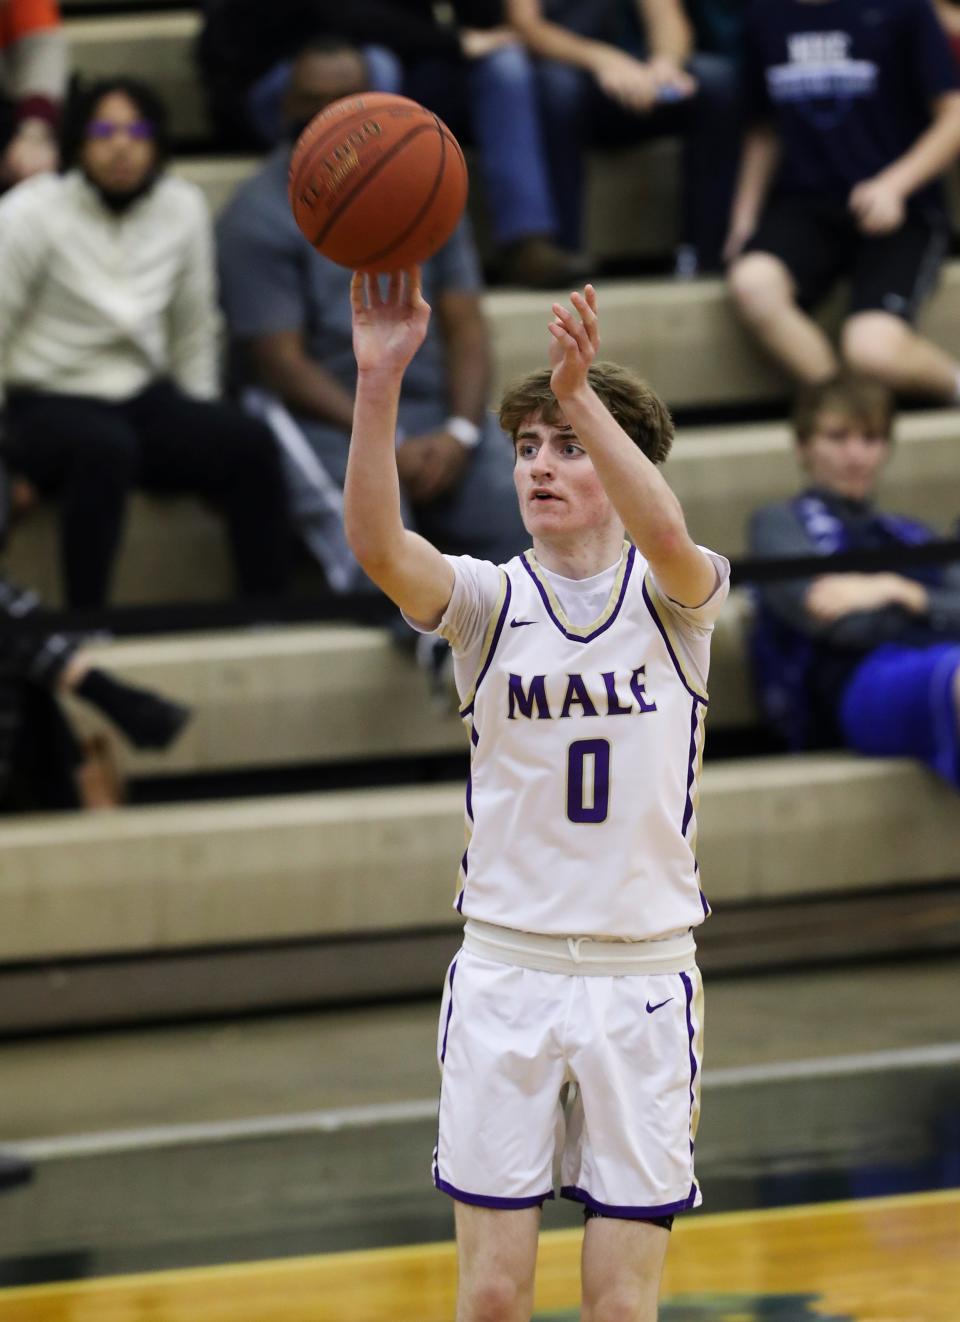 Male’s Cole Edelen (0) shot a jumper against Belfry during their game in the King of the Bluegrass Holiday Classic tournament at the Fairdale High School in Louisville, Ky. on Dec. 18, 2021.